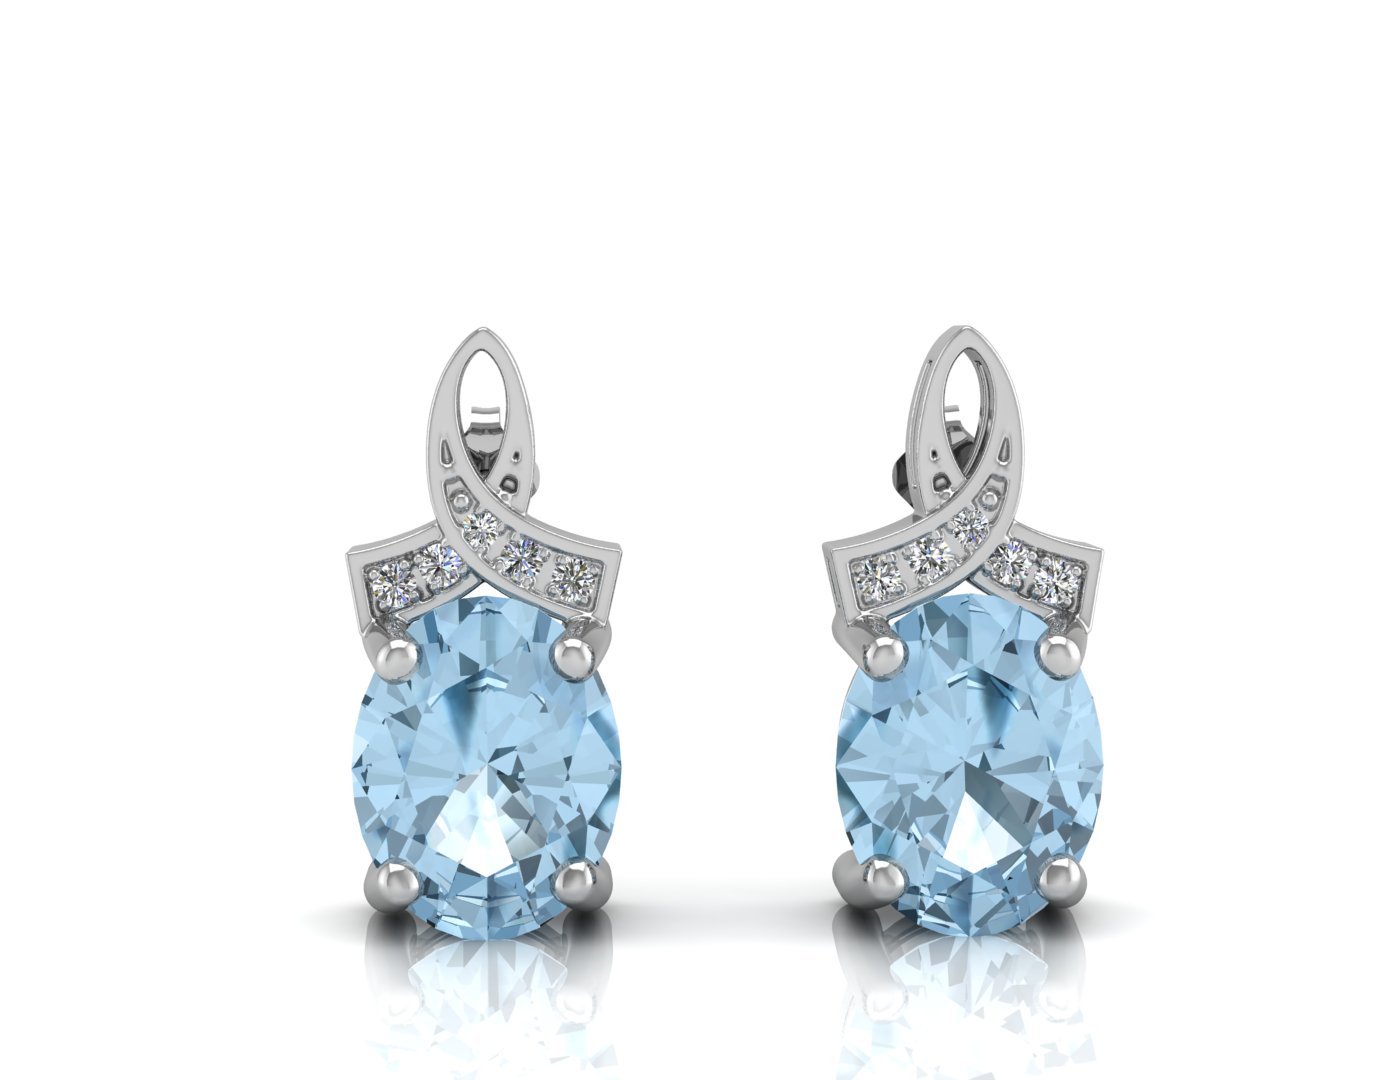 9ct White Gold Diamond And Blue Topaz Earrings - Image 3 of 4